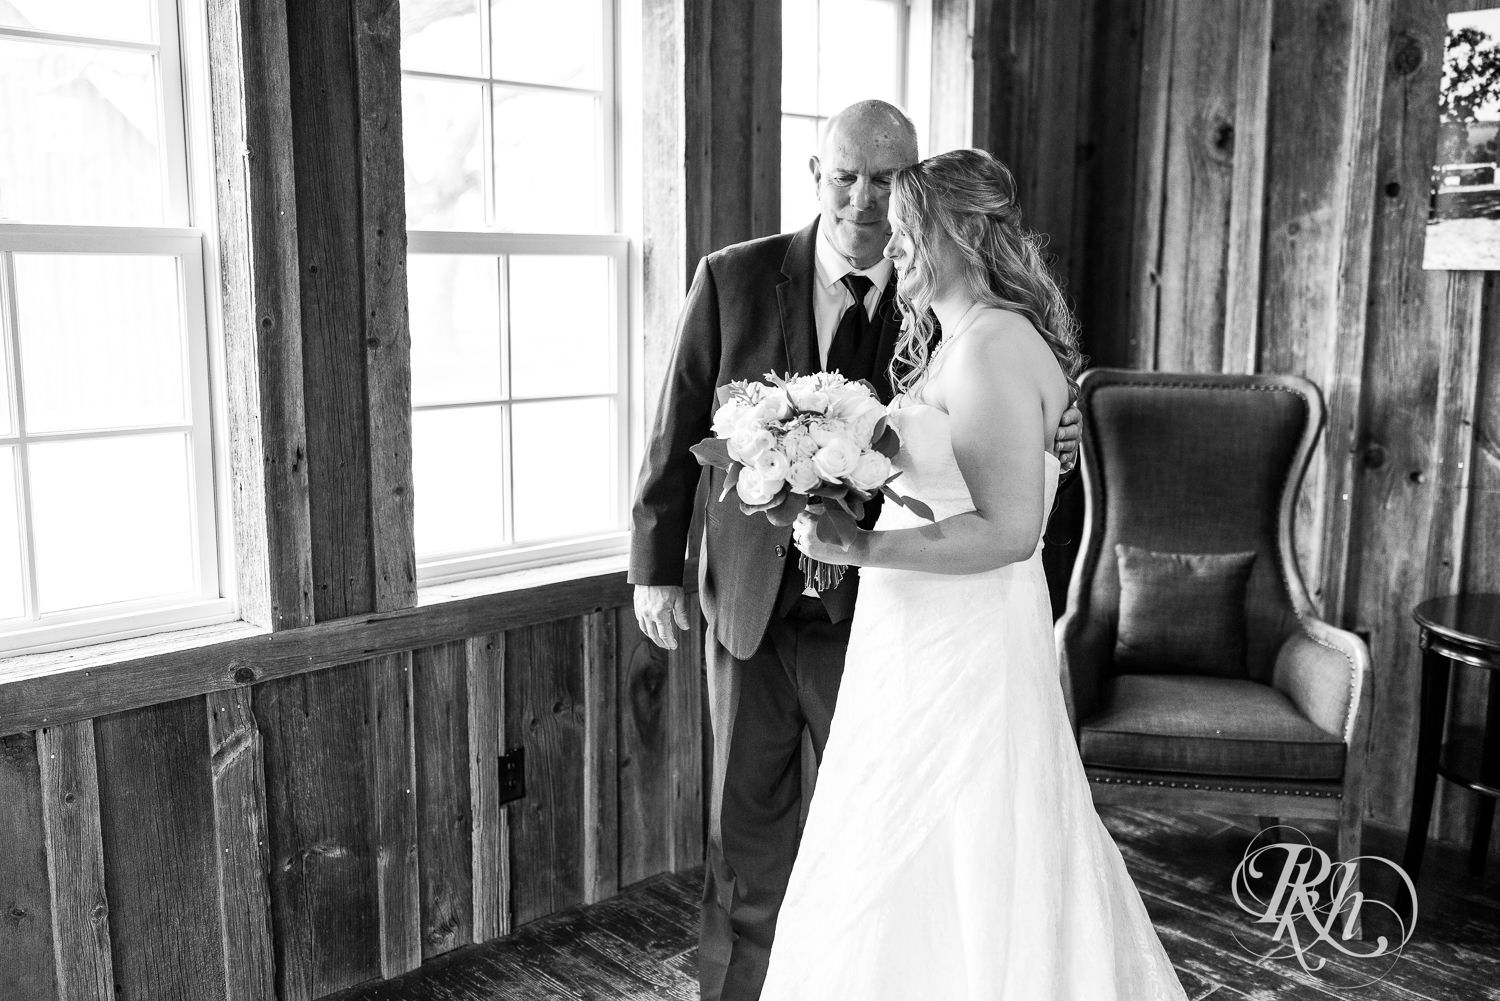 Bride does first look with her dad on wedding day at Almquist Farm in Hastings, Minnesota.